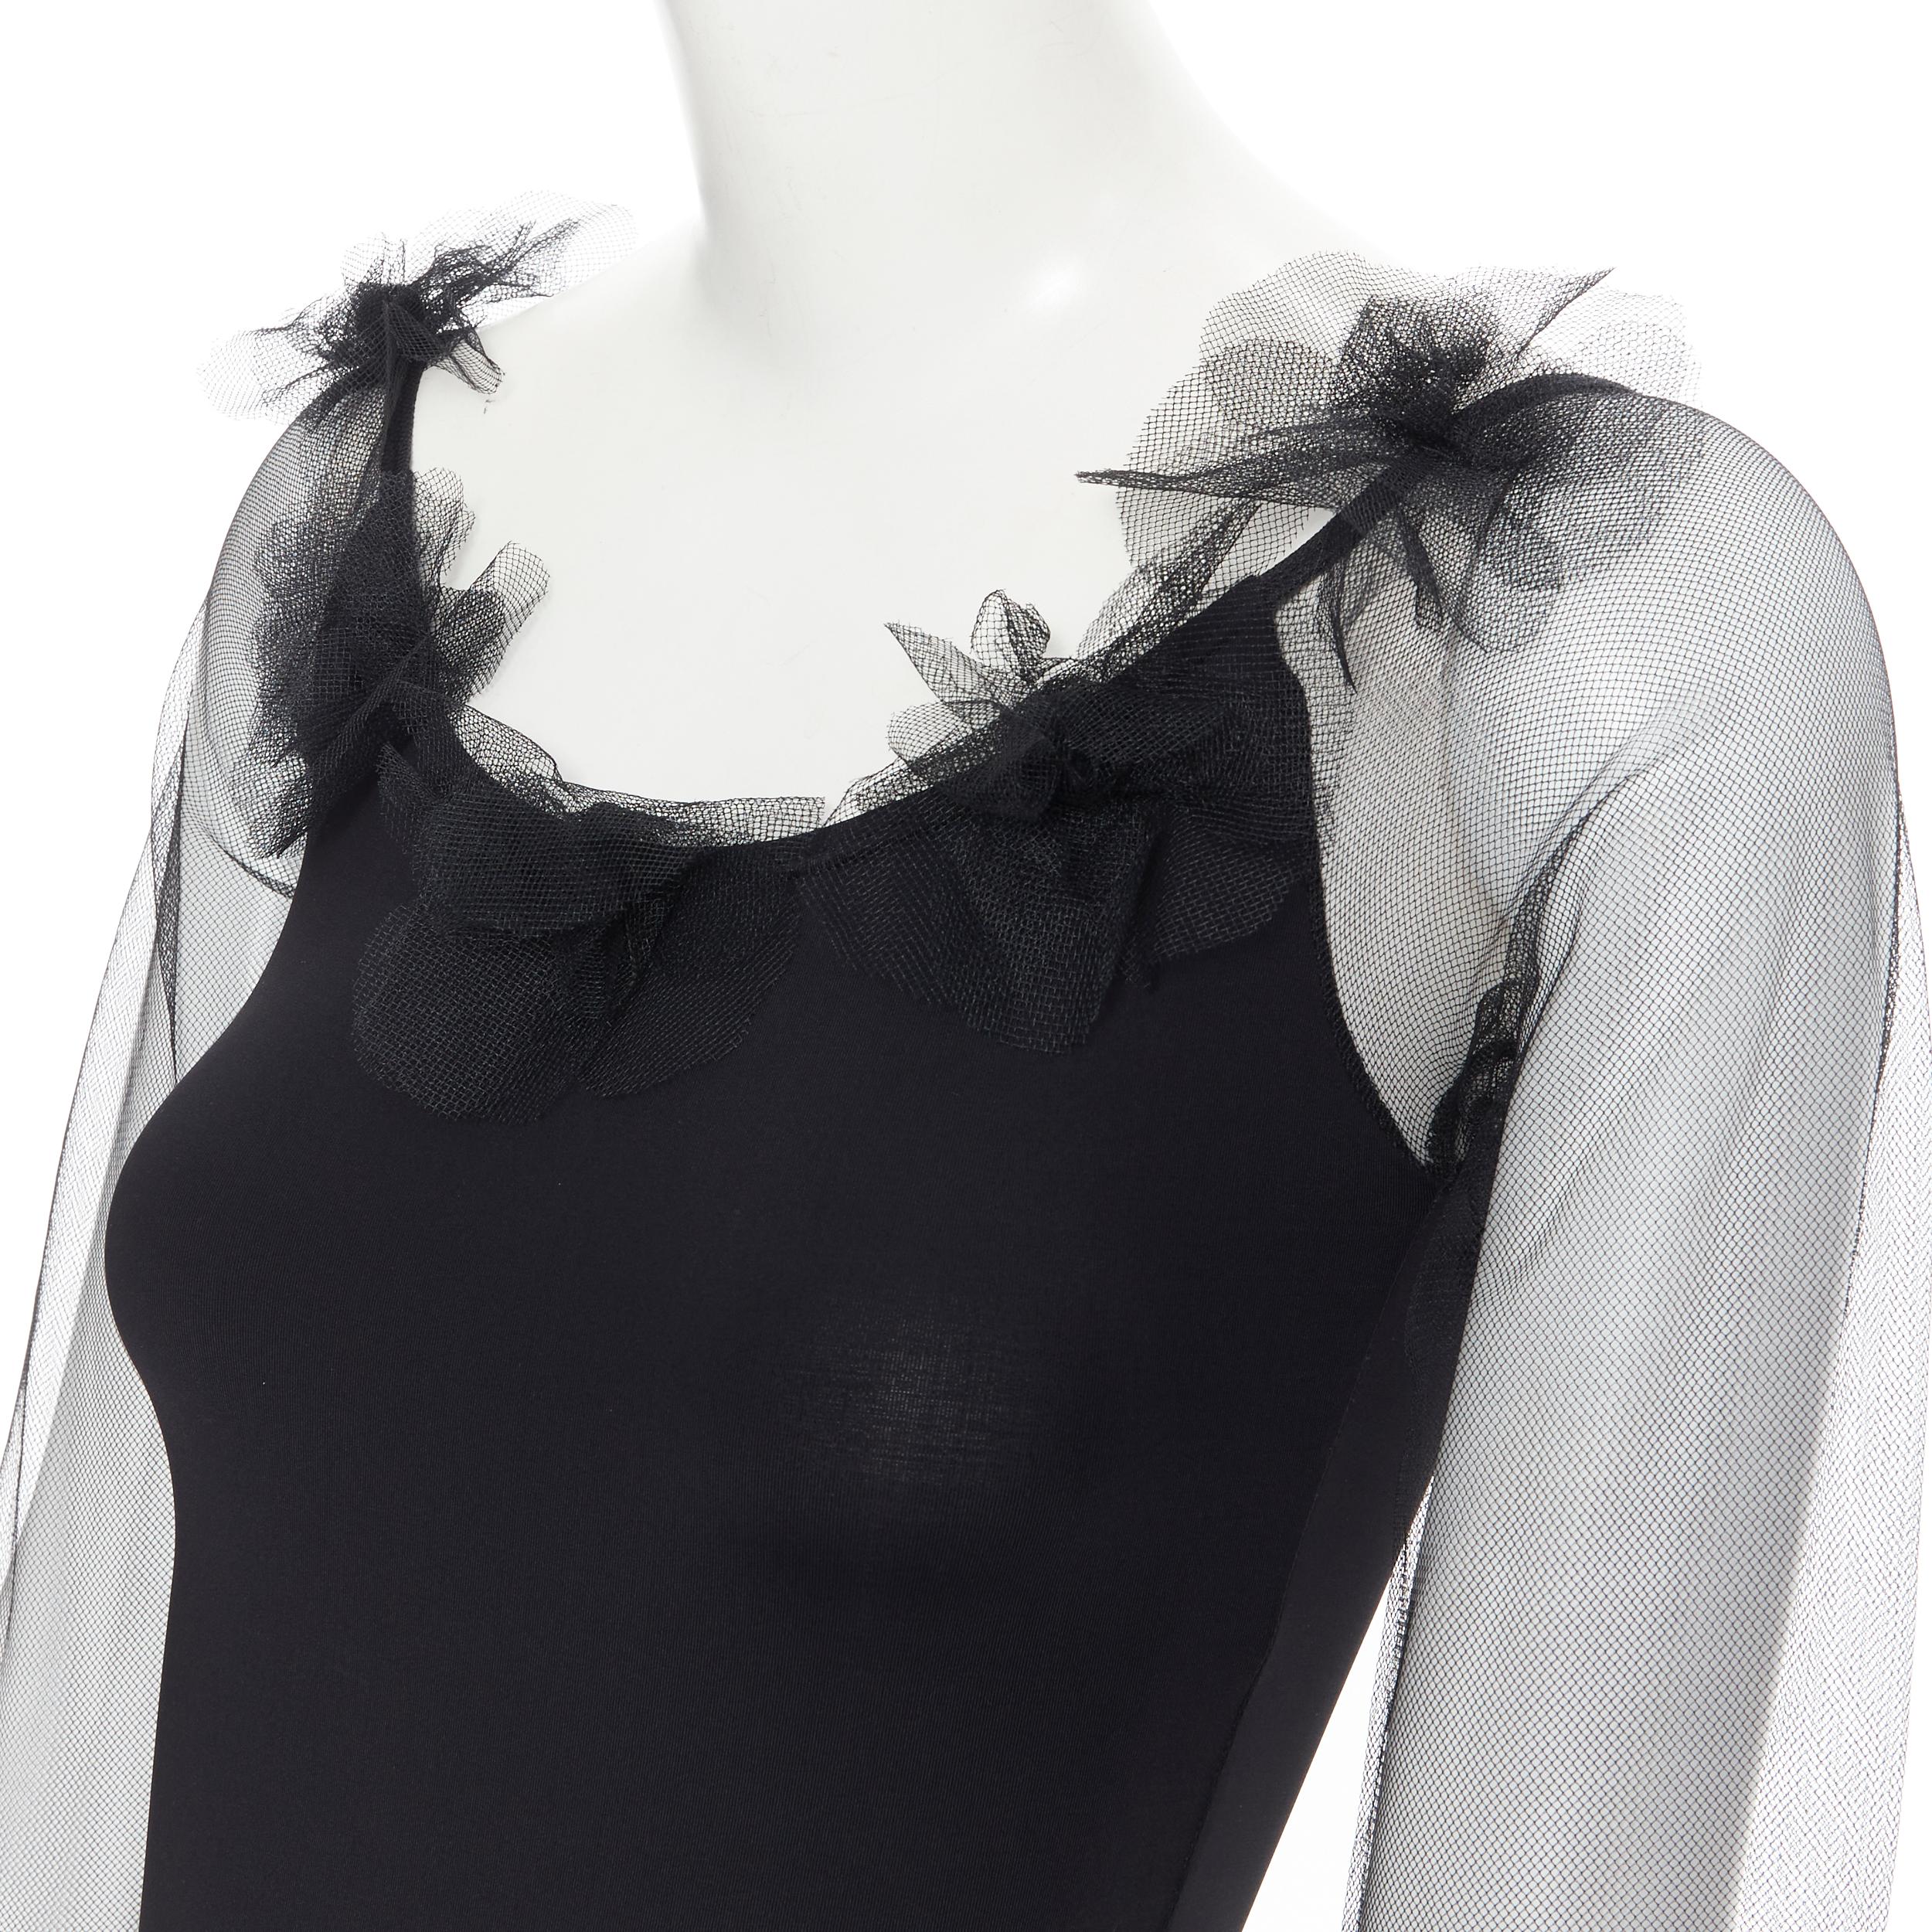 new MOSCHINO Cheap Chic black sheer sleeve ruffle pom trim bodysuit top IT40 S 
Reference: TGAS/B01033 
Brand: Moschino 
Material: Polyester 
Color: Black 
Pattern: Solid 
Extra Detail: Ruffle with black pom pom trimming along collar. Sheer sleeves.